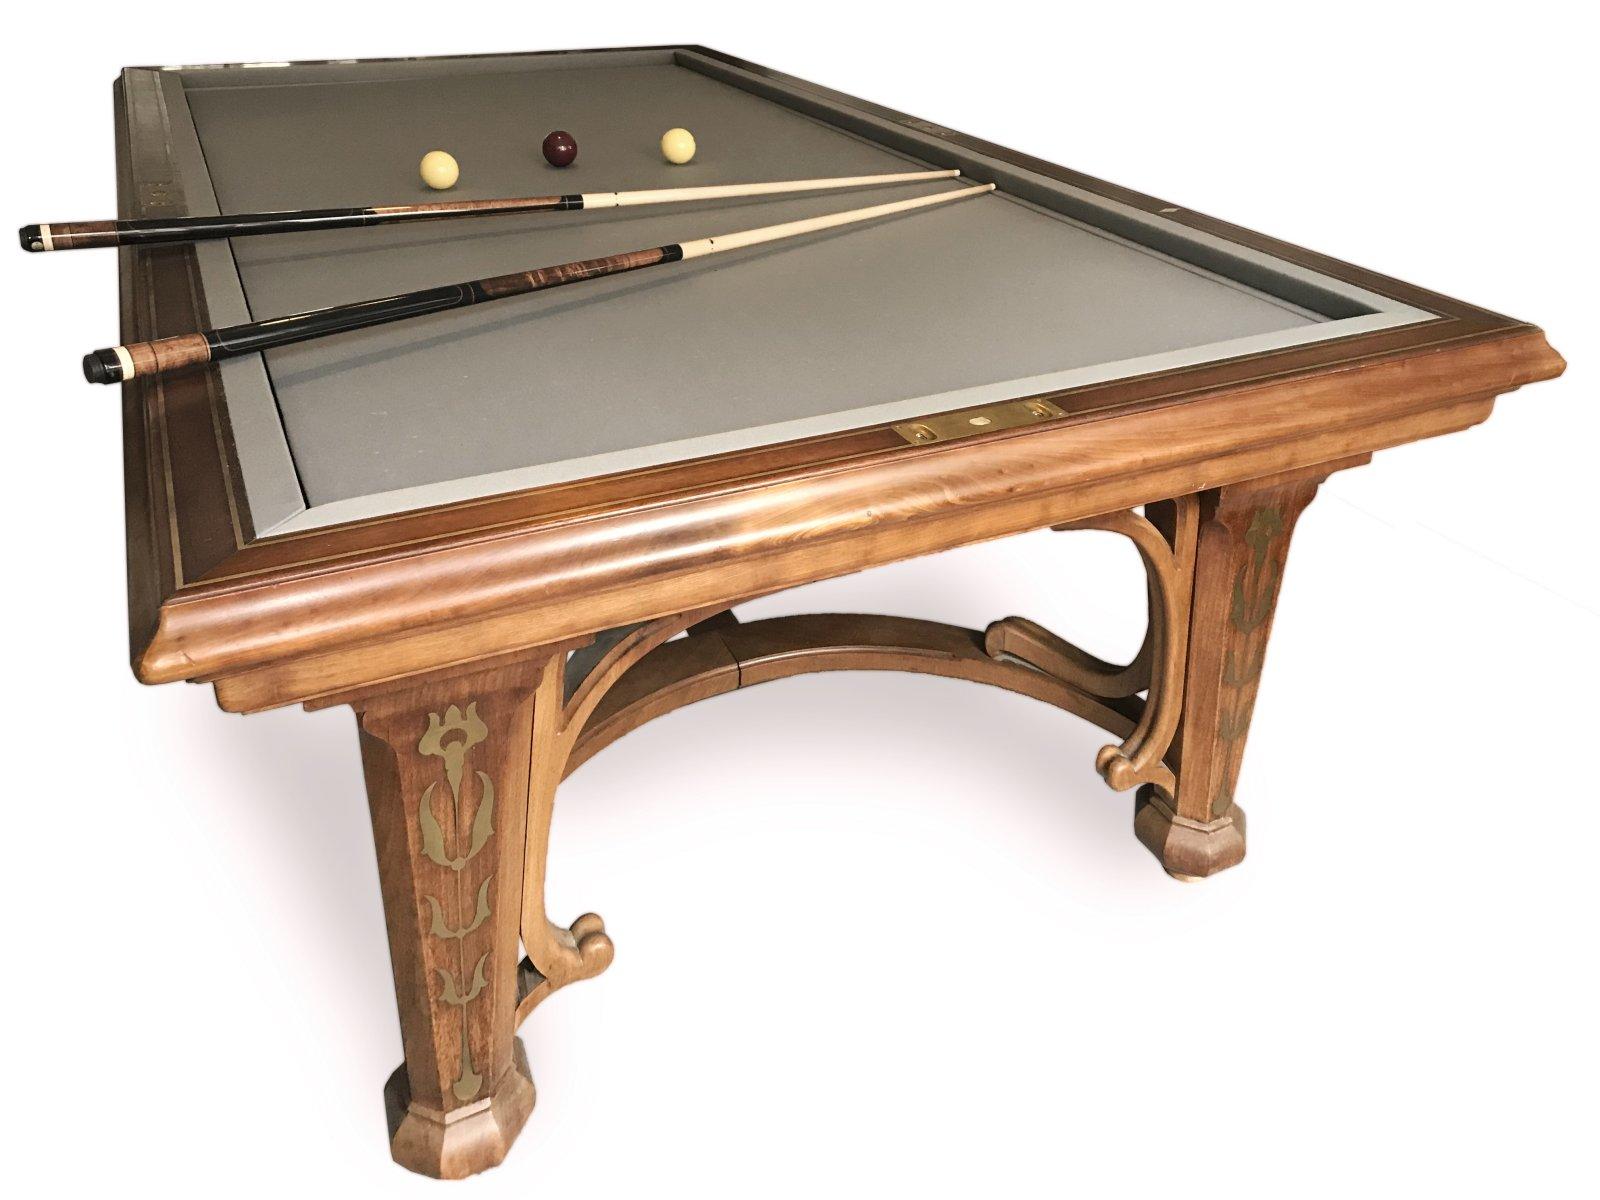 Emile Hurtré French Art Nouveau Billiard table.
Made by award-winning artisan E. Gueret (Médaille d’Or 1889).

Hurtré is best known for his architectural projects and designs, notably the interior of the famous Parisian restaurant ‘La Fermette